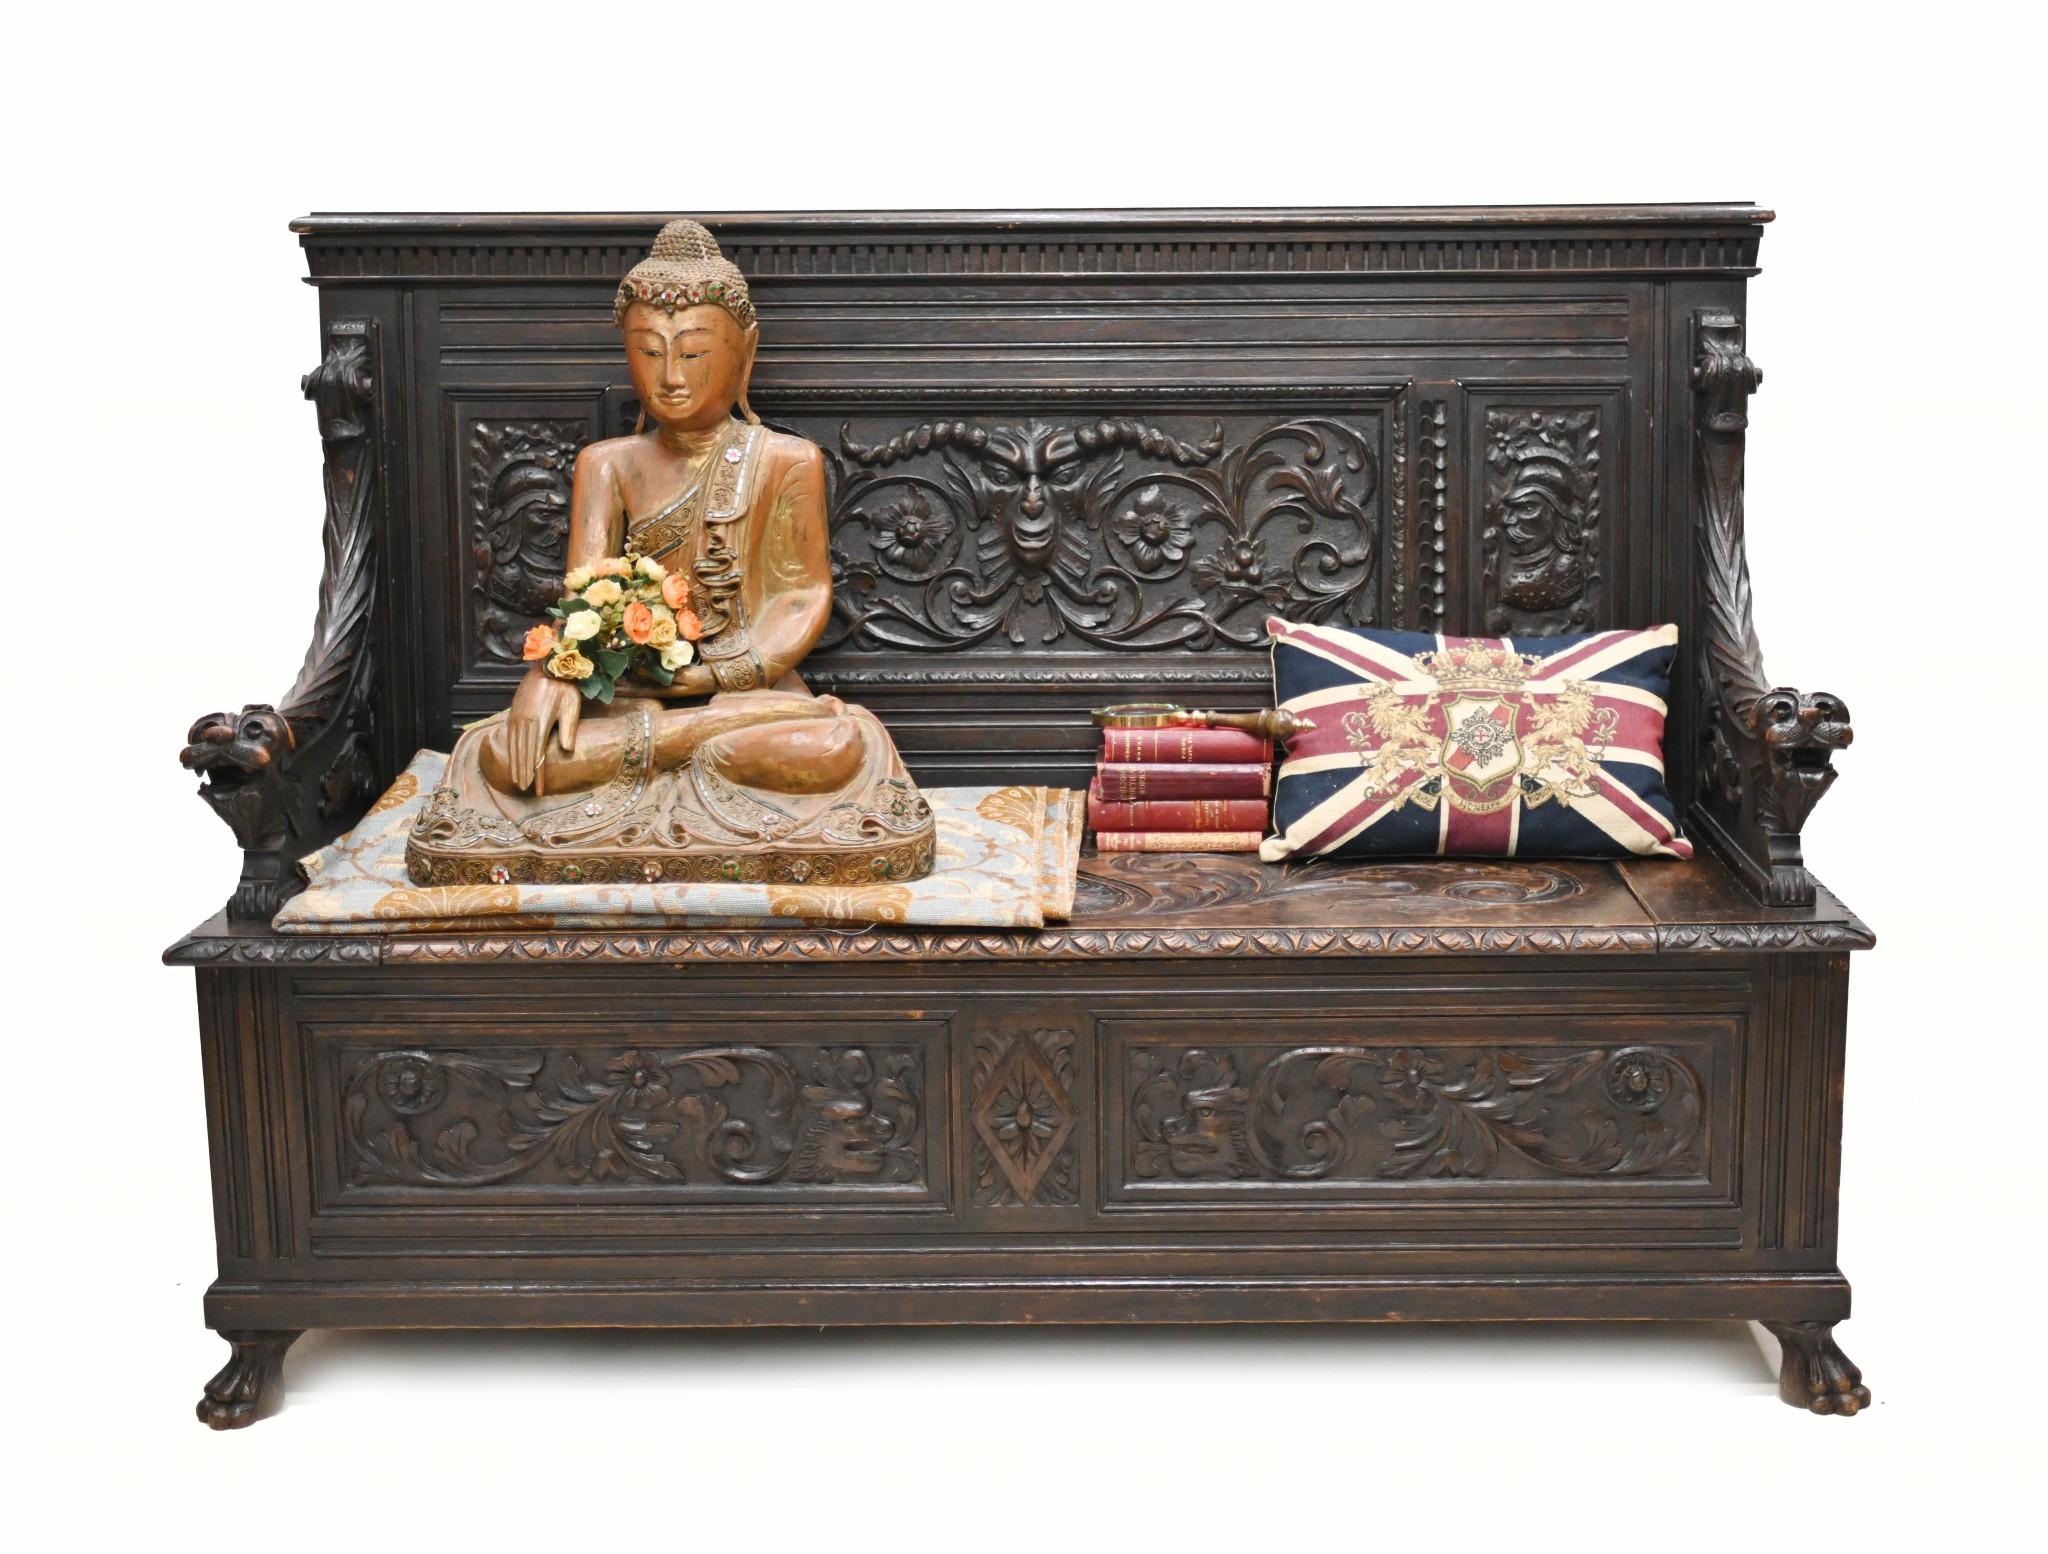 You are viewing an English hand carved monks bench - also sometimes referred to as a settle
These are a great piece for the hall as the bench opens up to reveal all the storage area, great for shoes and boots
Classic farmhouse meets castle look to